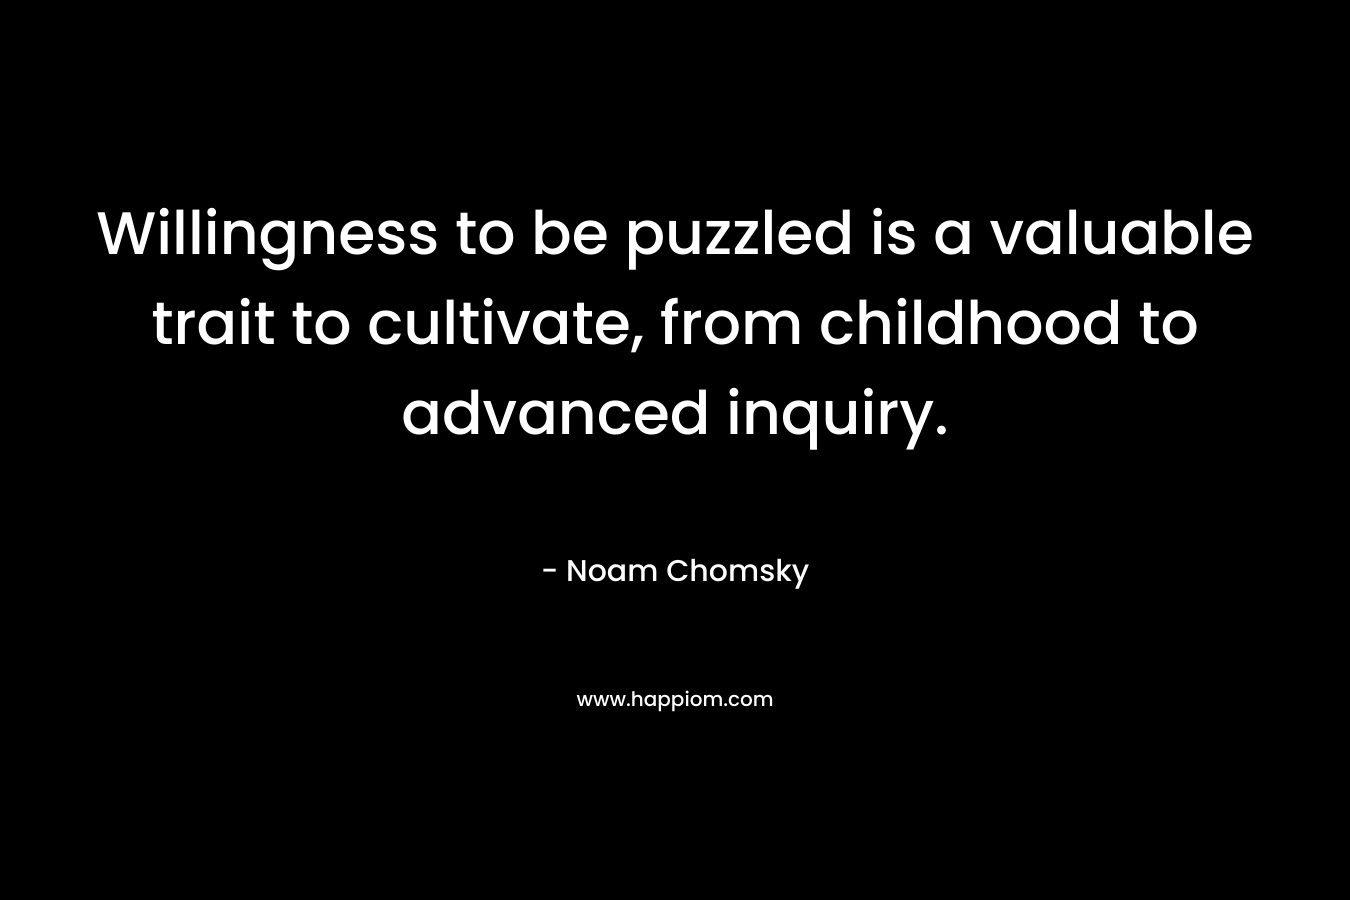 Willingness to be puzzled is a valuable trait to cultivate, from childhood to advanced inquiry.